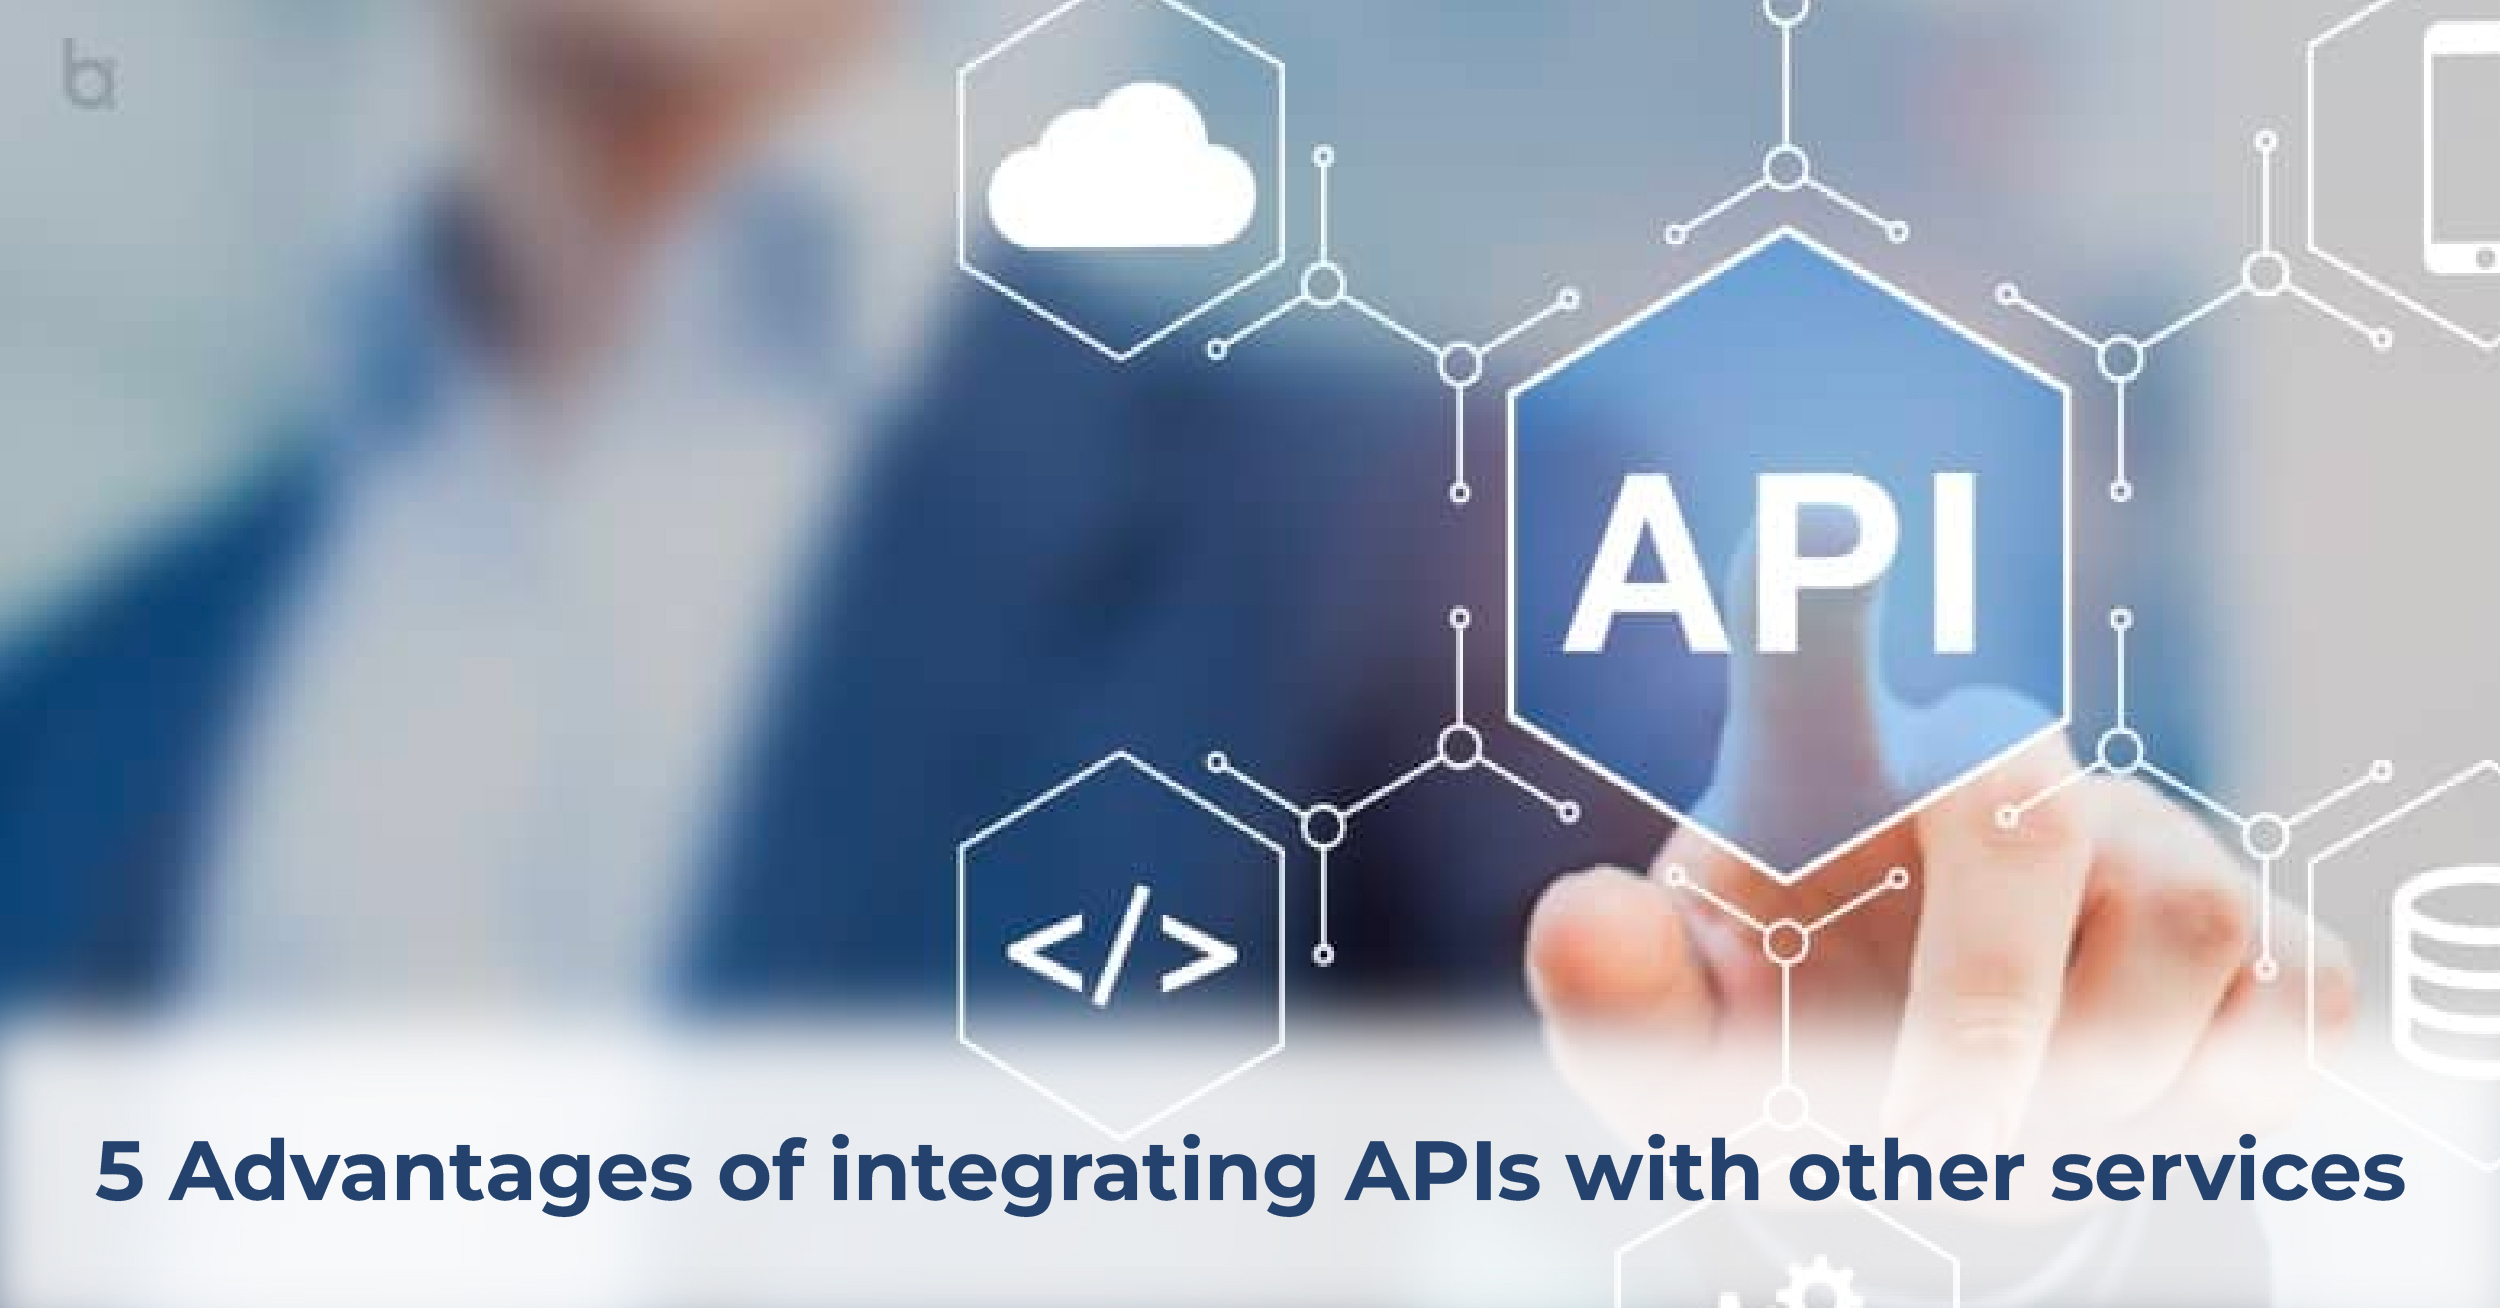 5 Advantages of integrating APIs with other services